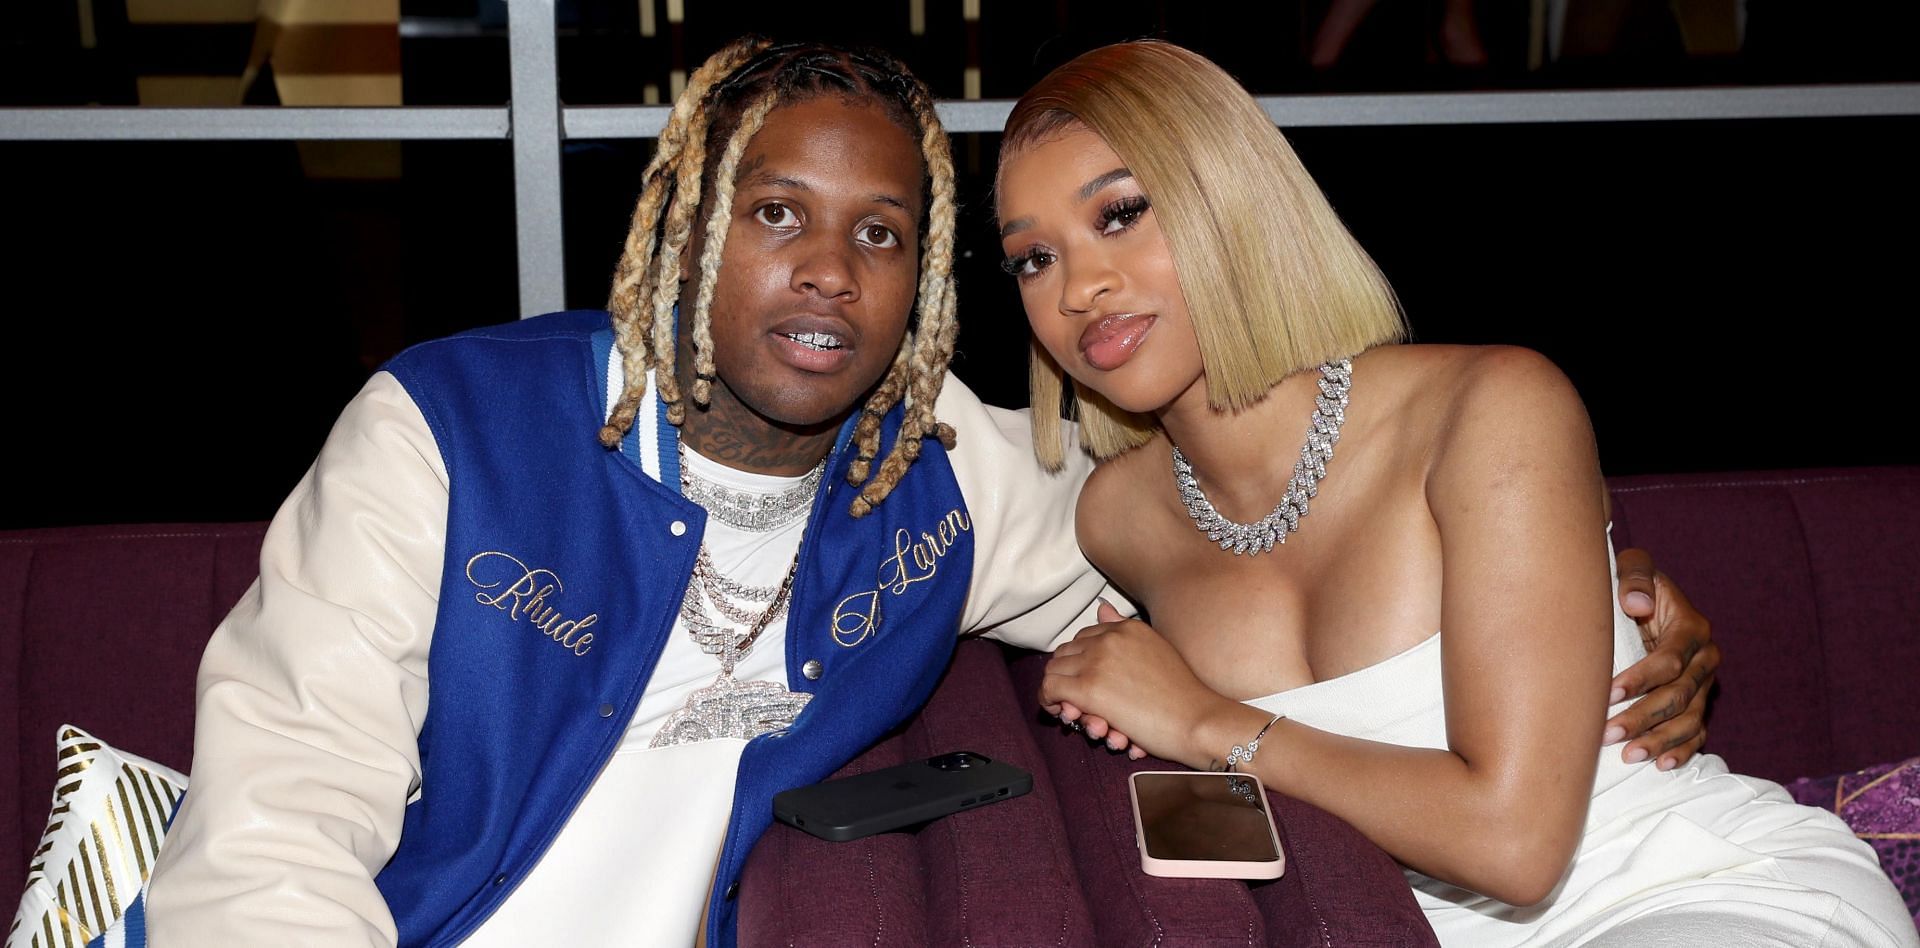 Lil Durk and India Royale (Image via Getty Images)